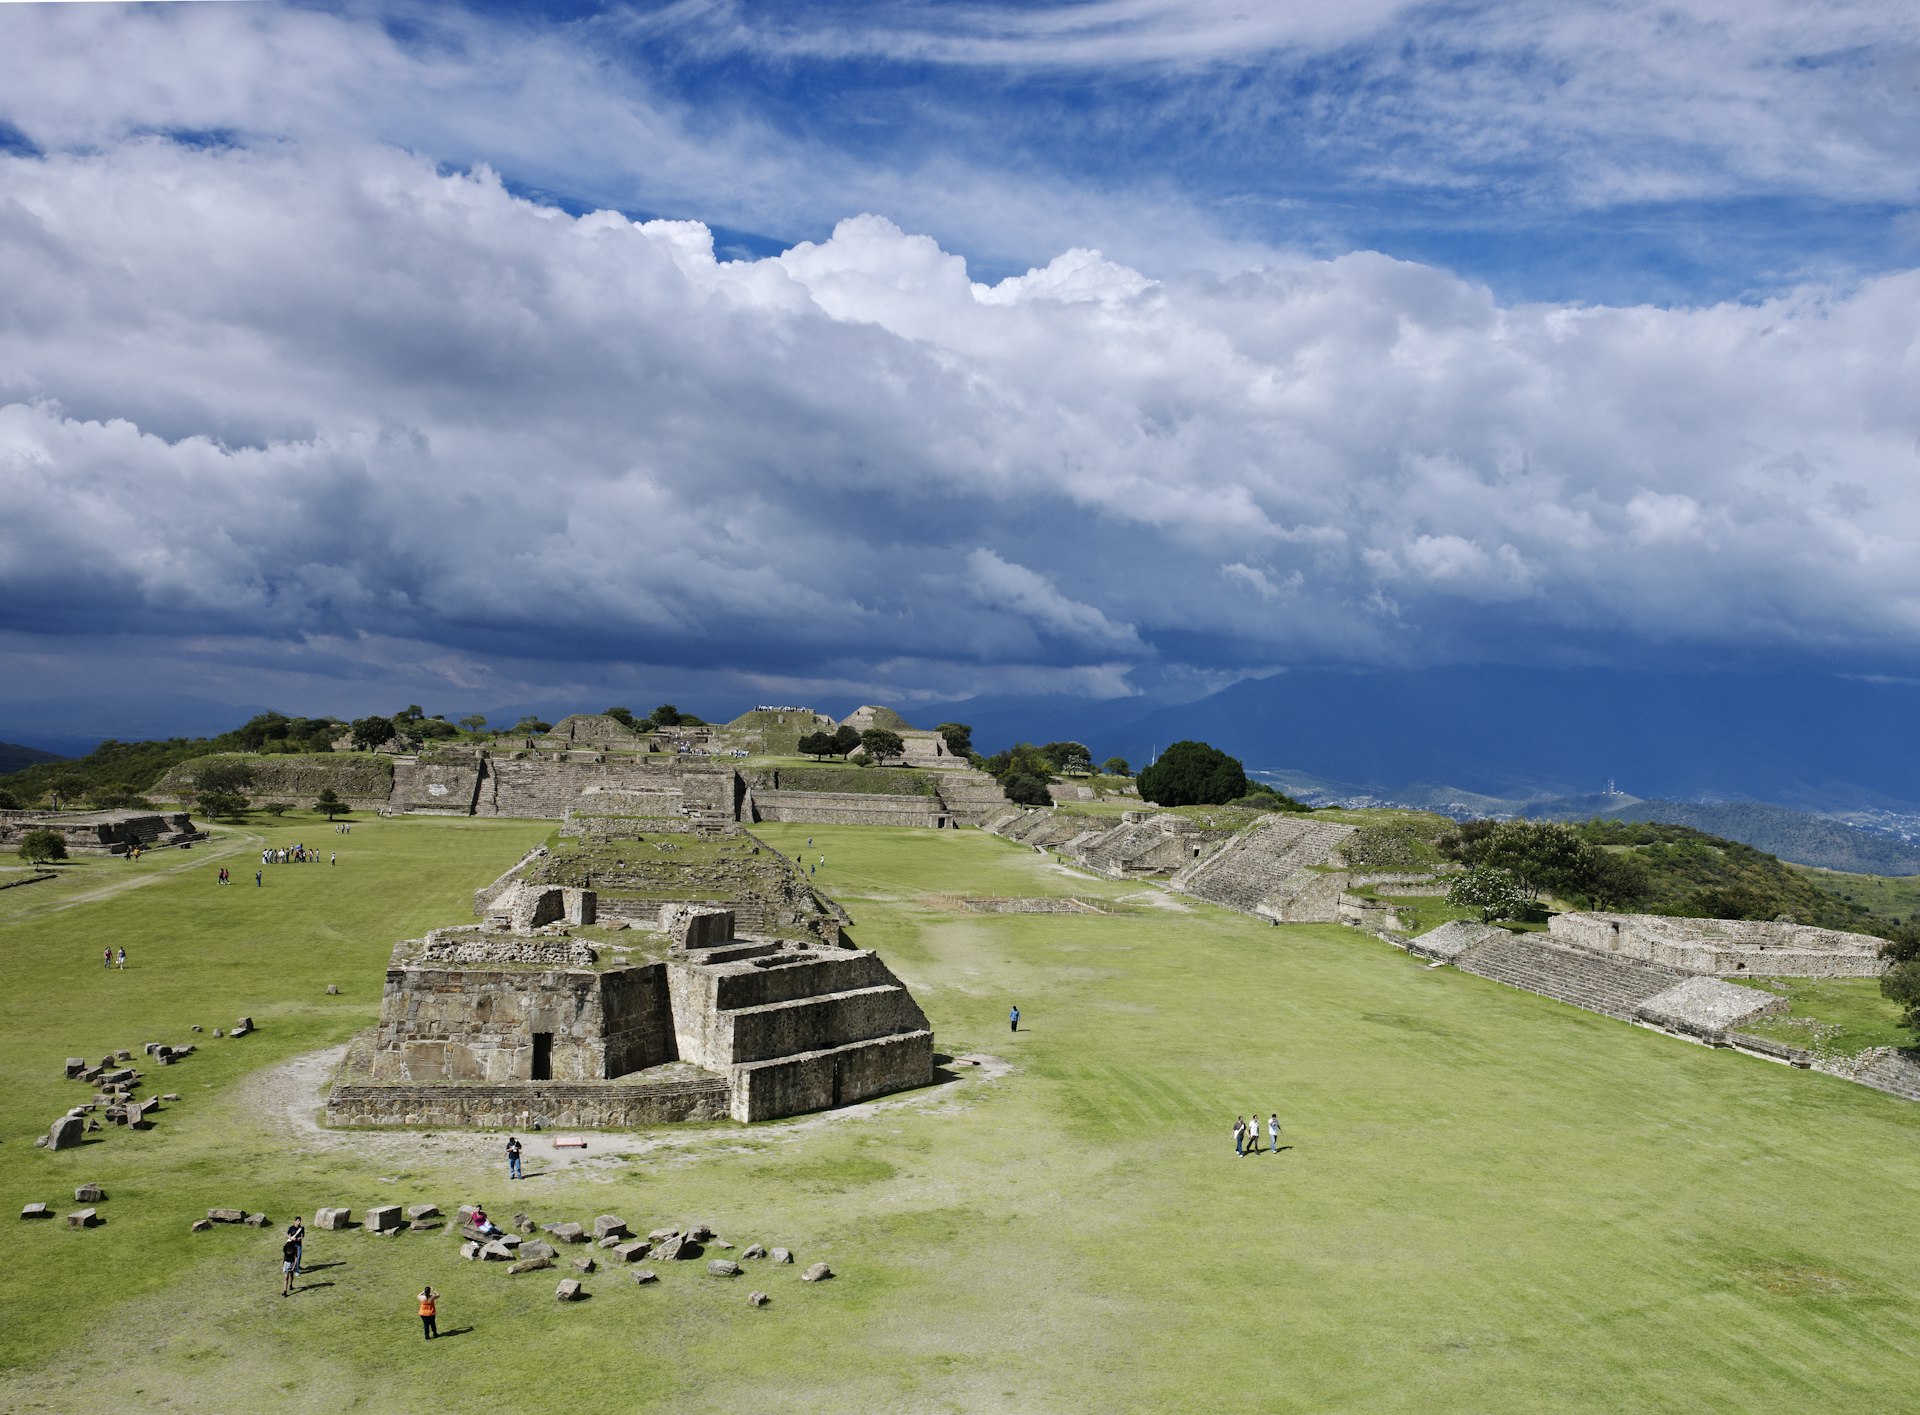 Aerial view of Monte Albán archaeological site on mountain-top above Oaxaca City, Mexico